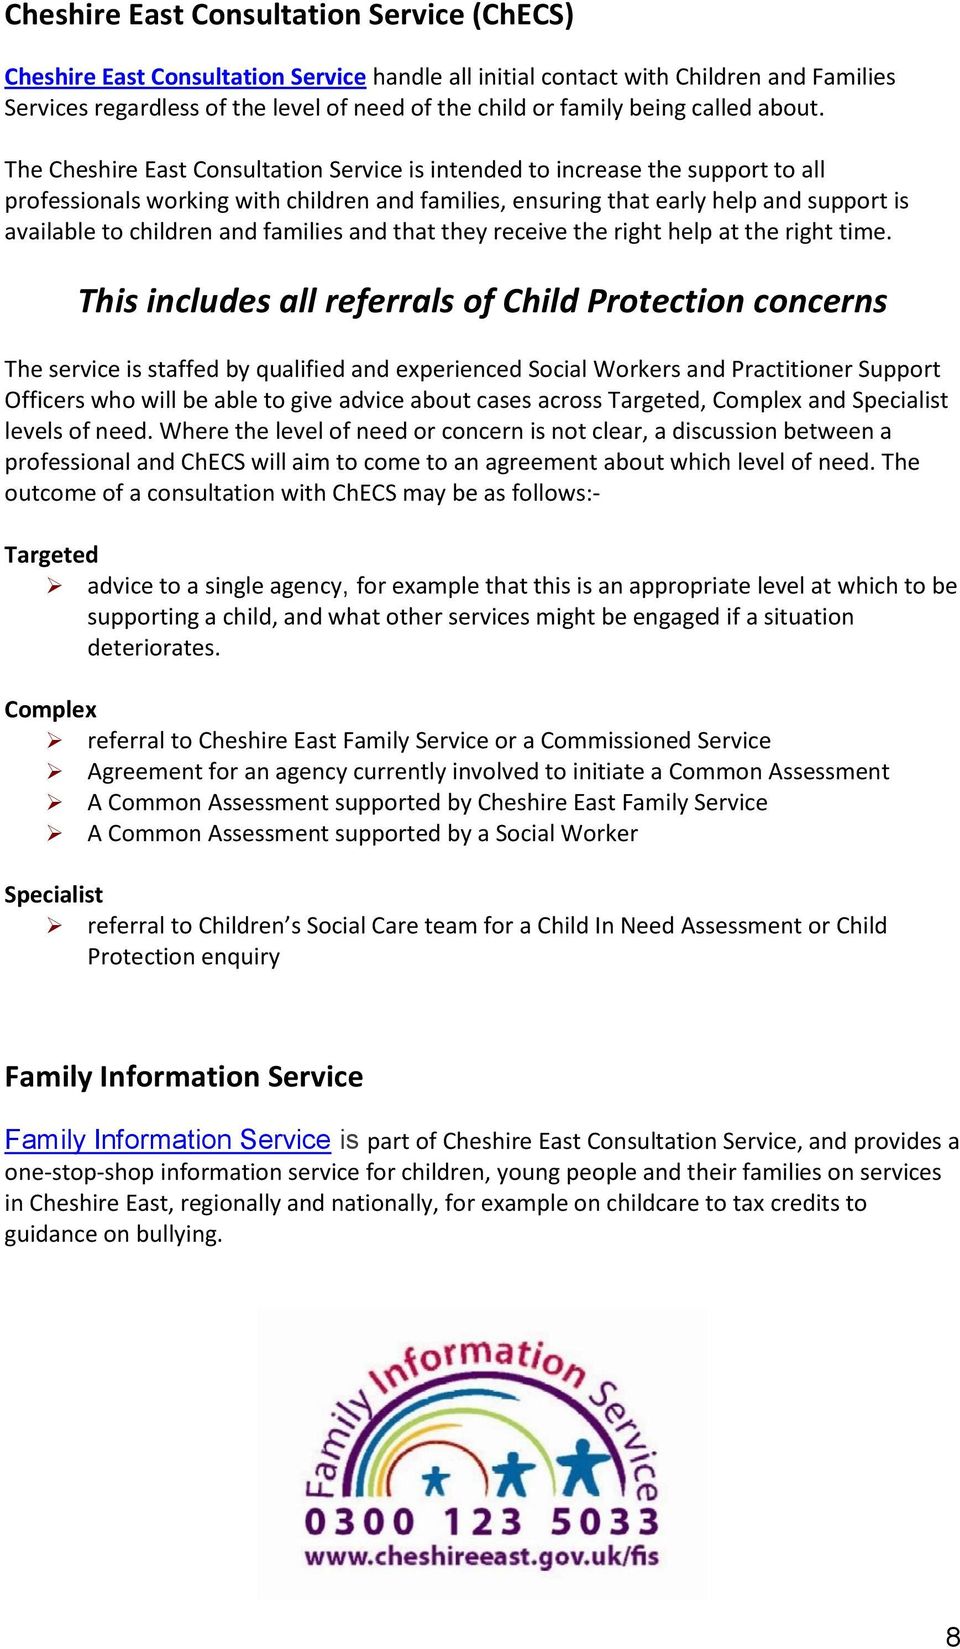 The Cheshire East Consultation Service is intended to increase the support to all professionals working with children and families, ensuring that early help and support is available to children and